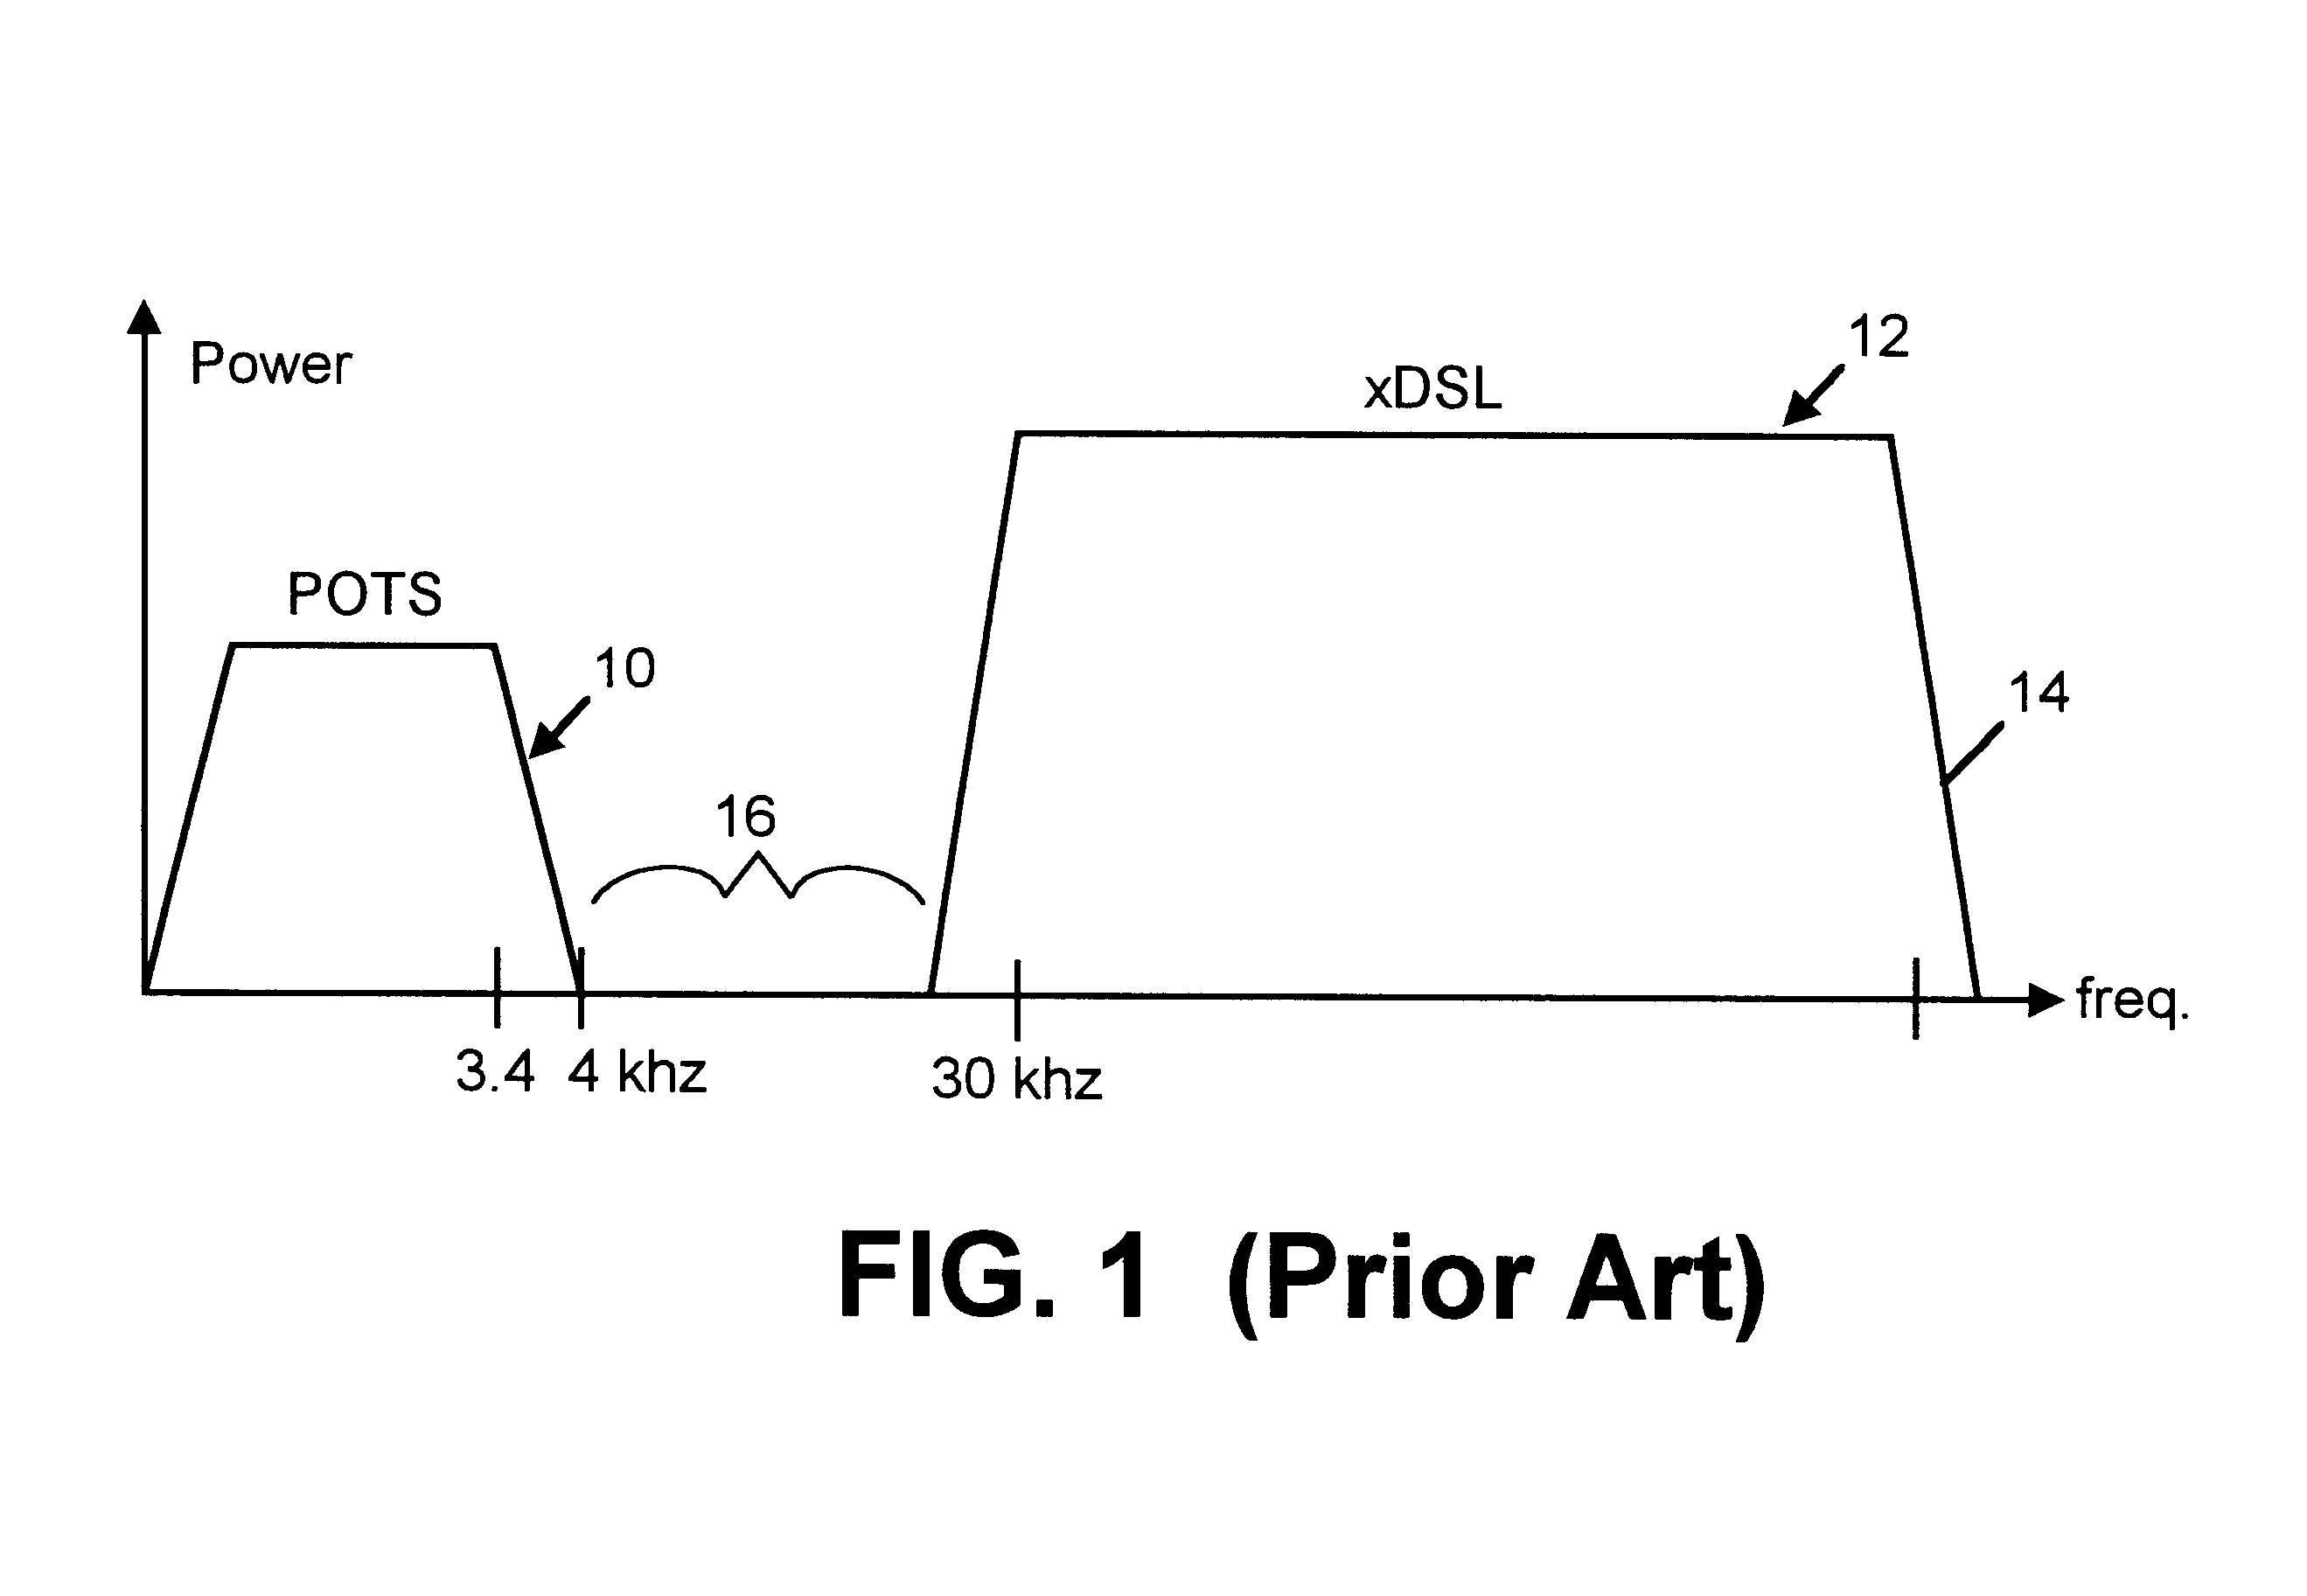 Apparatus for facilitating combined POTS and xDSL services at a customer premises